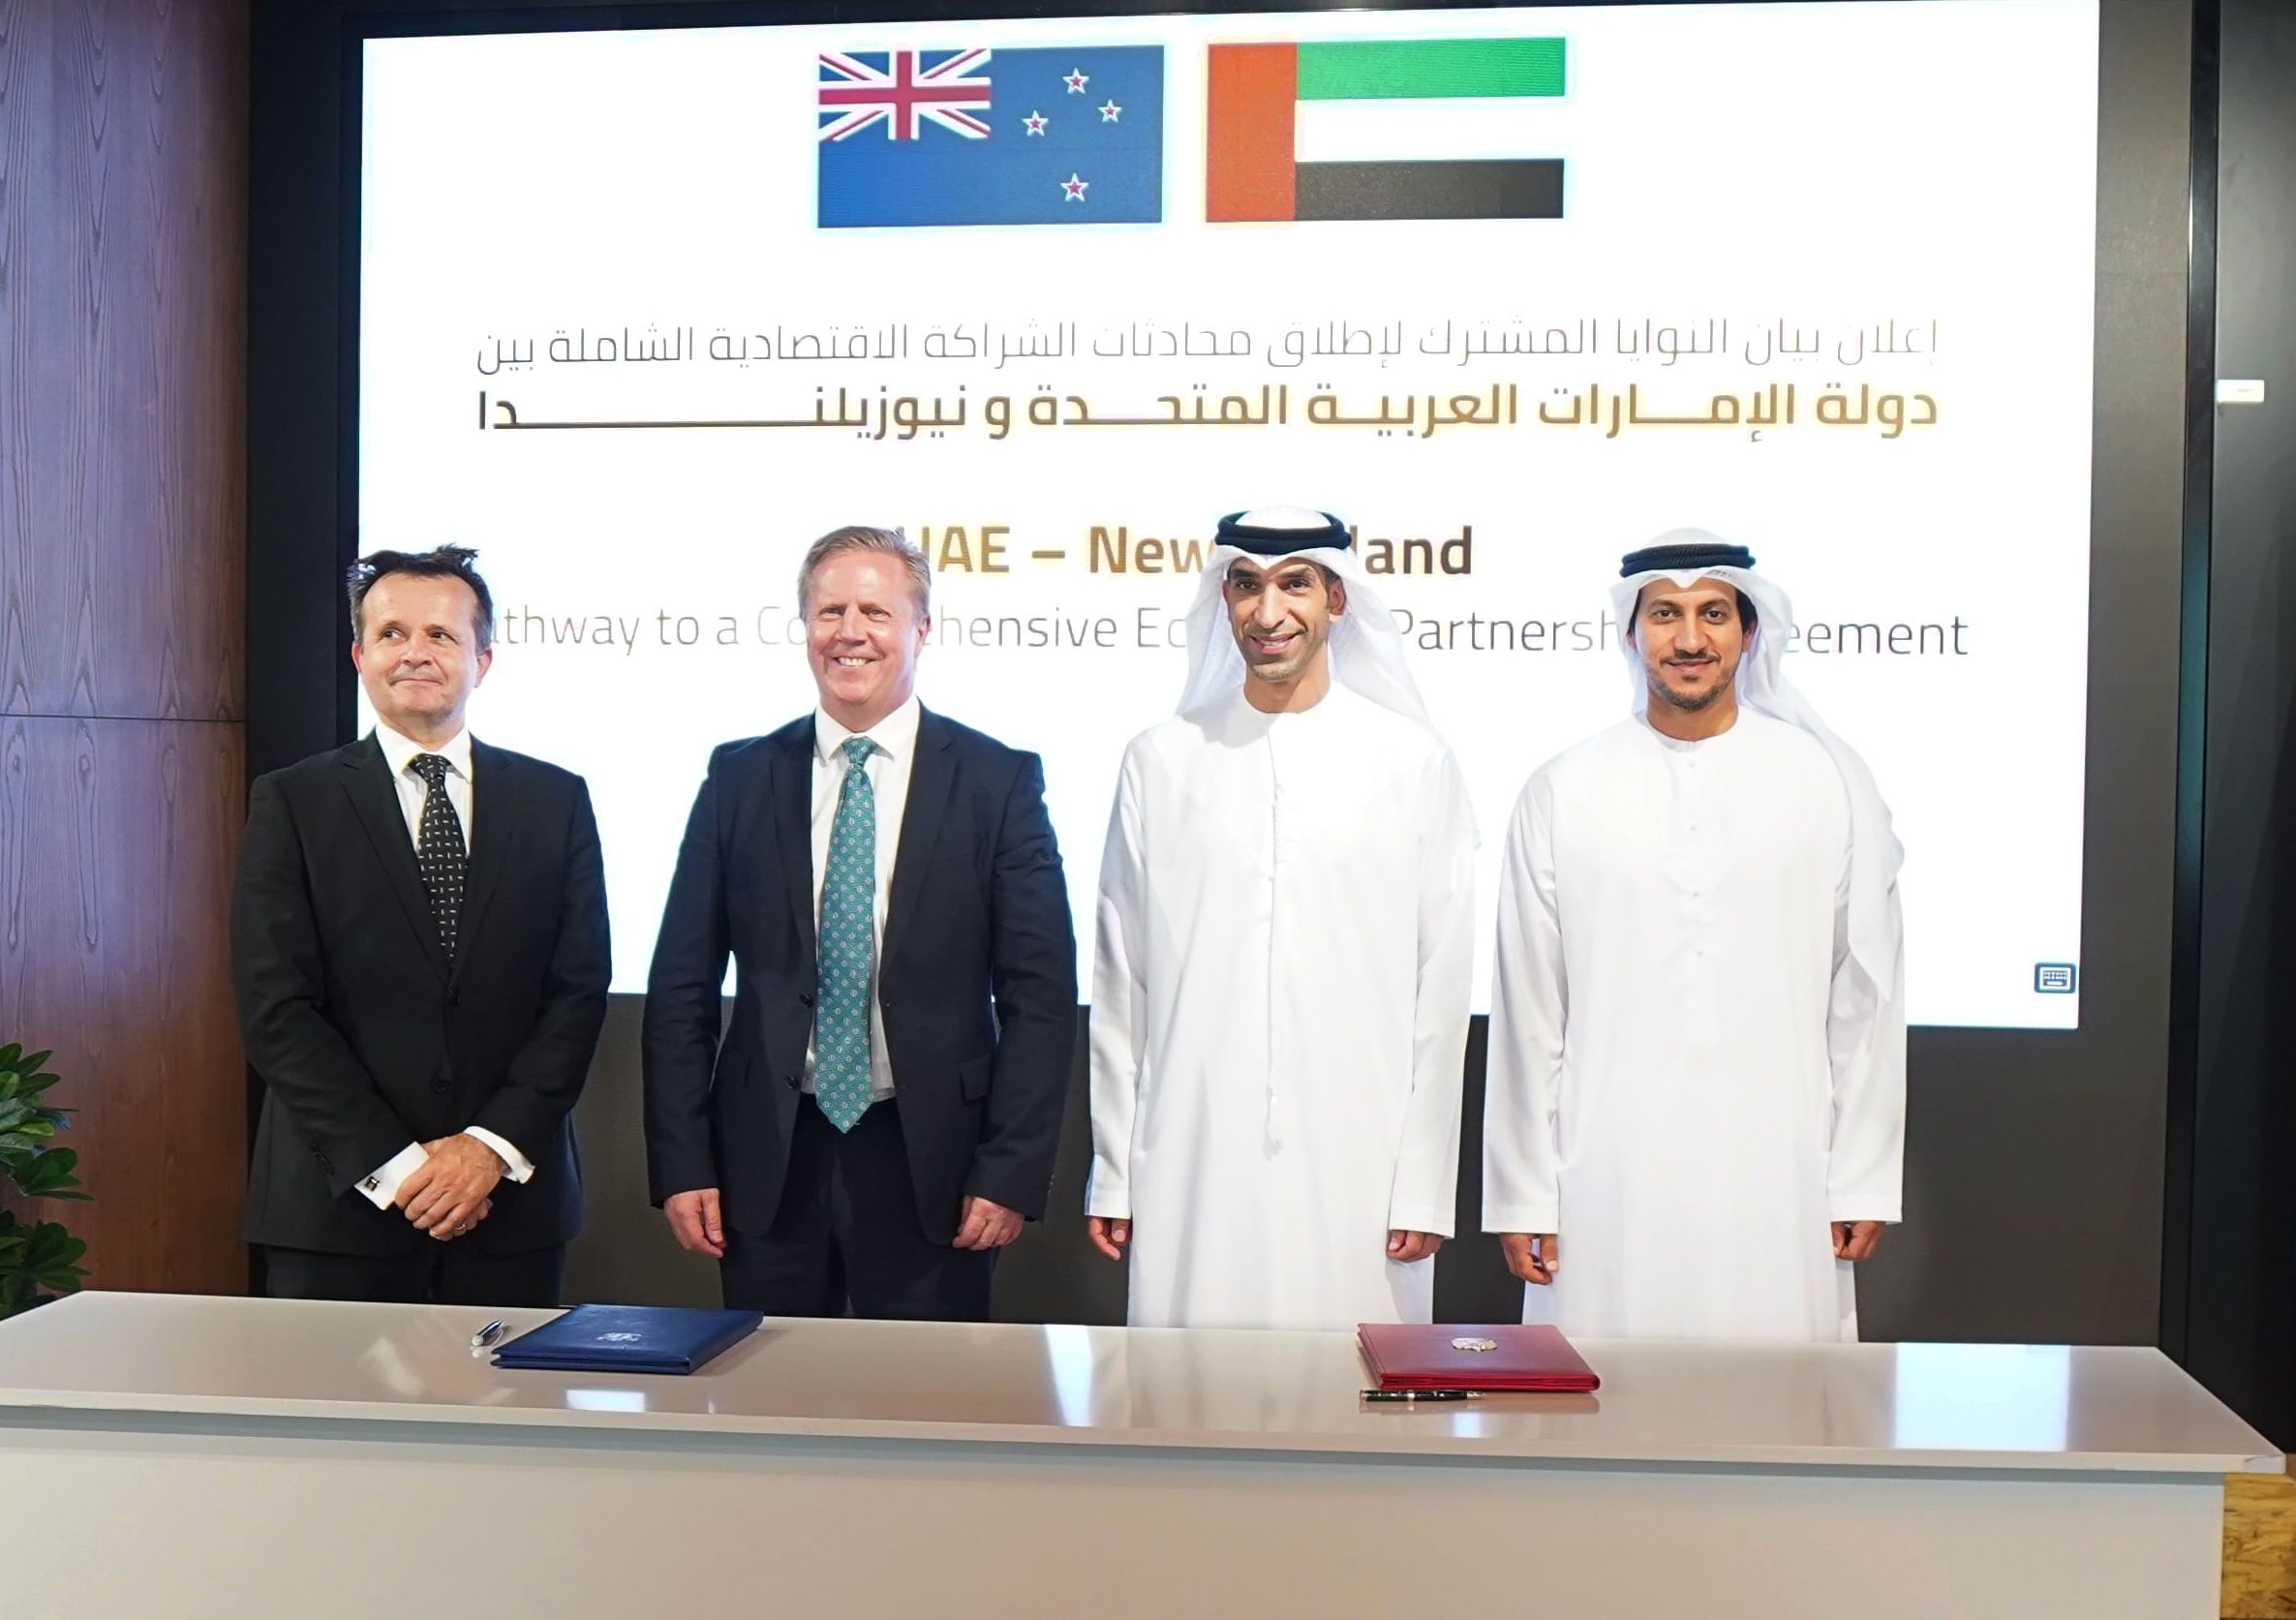 A declaration of intent to begin Cepa talks was signed by UAE minister of state for foreign trade Dr Thani bin Ahmed Al Zeyoudi and New Zealand trade minister Todd McClay